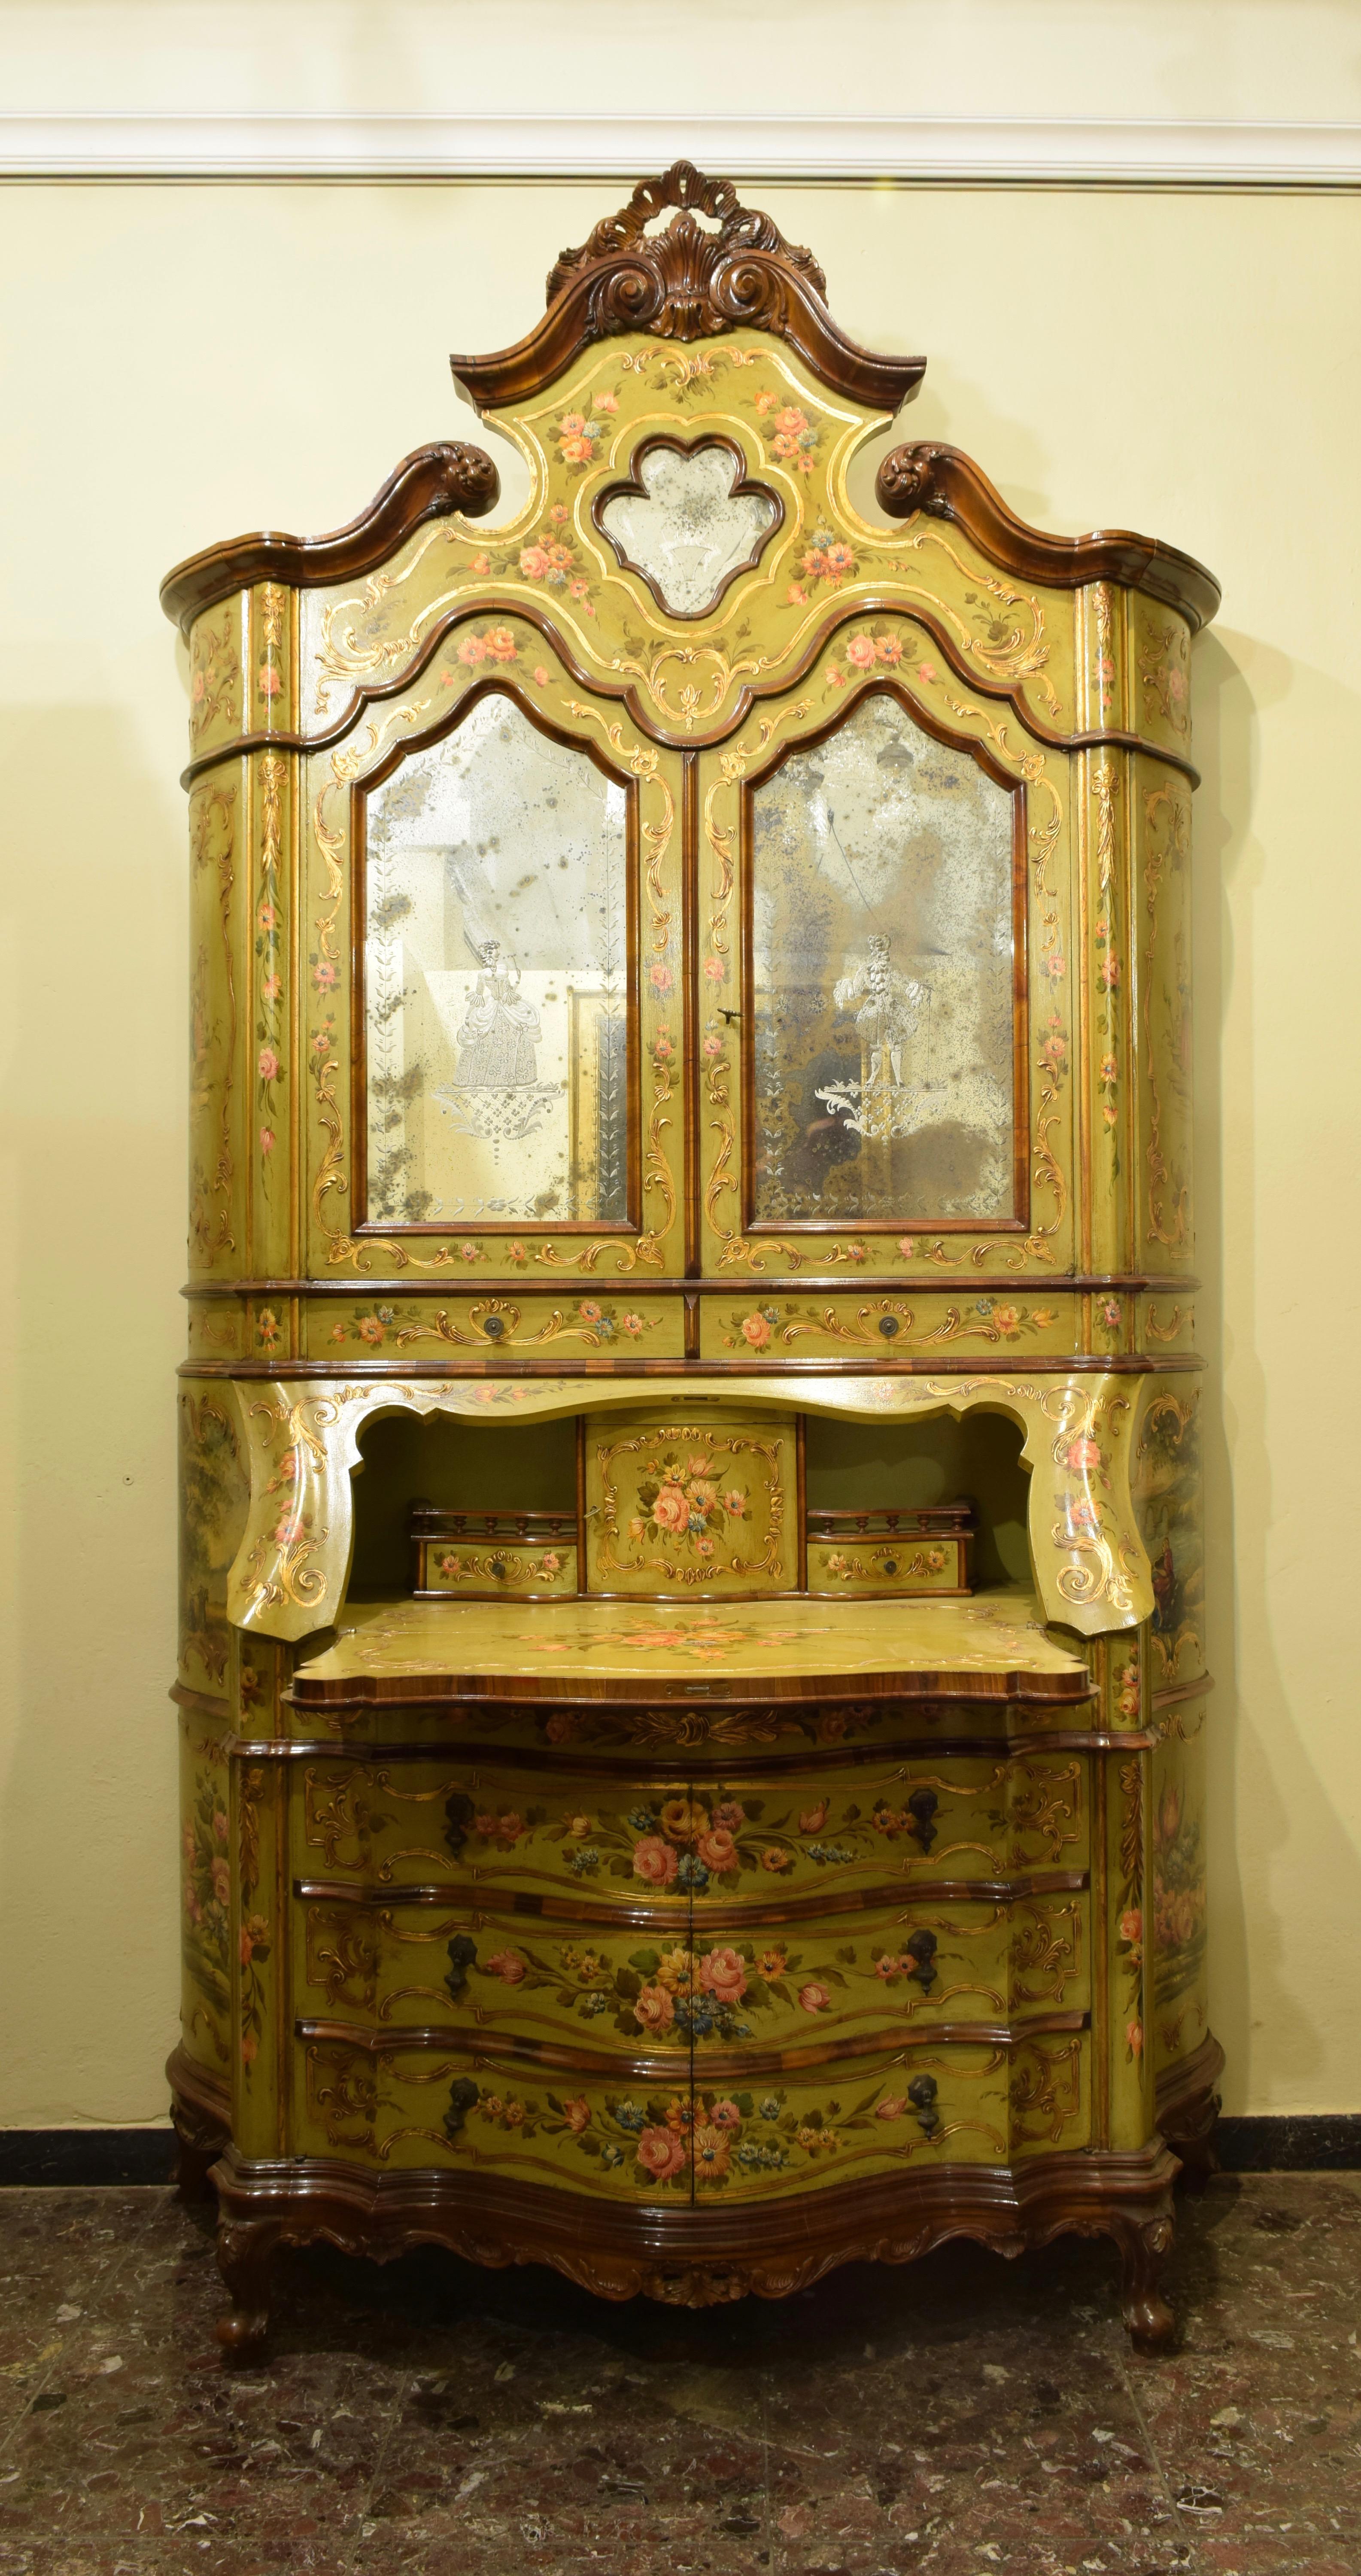 Venezia, Italy, handcrafted production from 1976
In Venetian style Louis XV
Painted and decorated in gold
Upper part with two doors with two beveled mirrors depicting a Lady and a Gentleman. Inside a door and two drawers.
In the lower part there